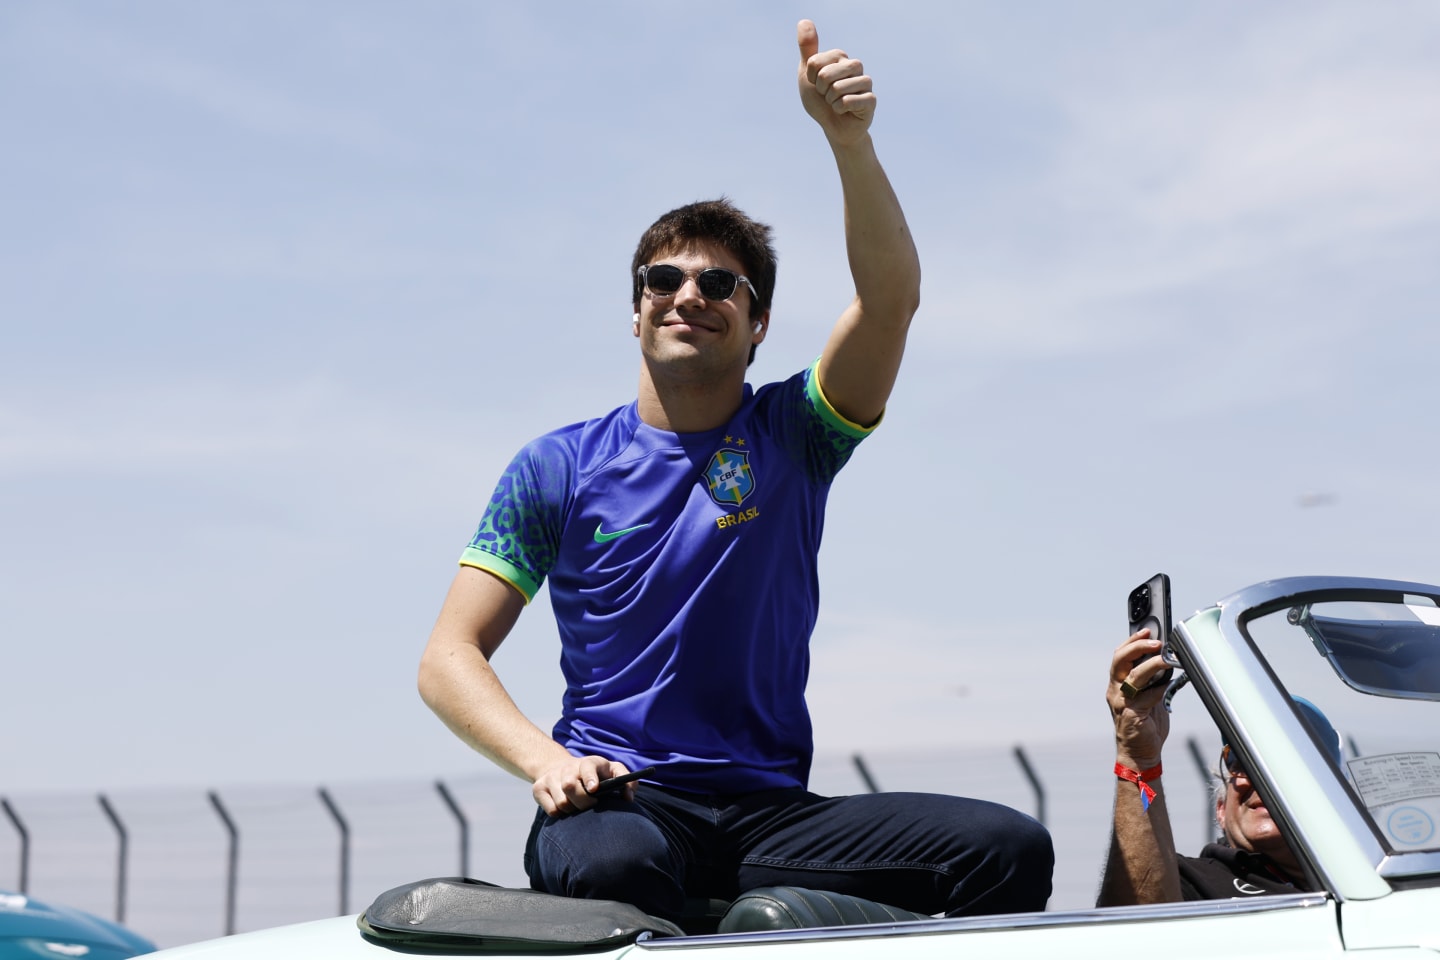 SAO PAULO, BRAZIL - NOVEMBER 13: Lance Stroll of Canada and Aston Martin F1 Team waves to the crowd on the drivers parade prior to the F1 Grand Prix of Brazil at Autodromo Jose Carlos Pace on November 13, 2022 in Sao Paulo, Brazil. (Photo by Jared C. Tilton/Getty Images)